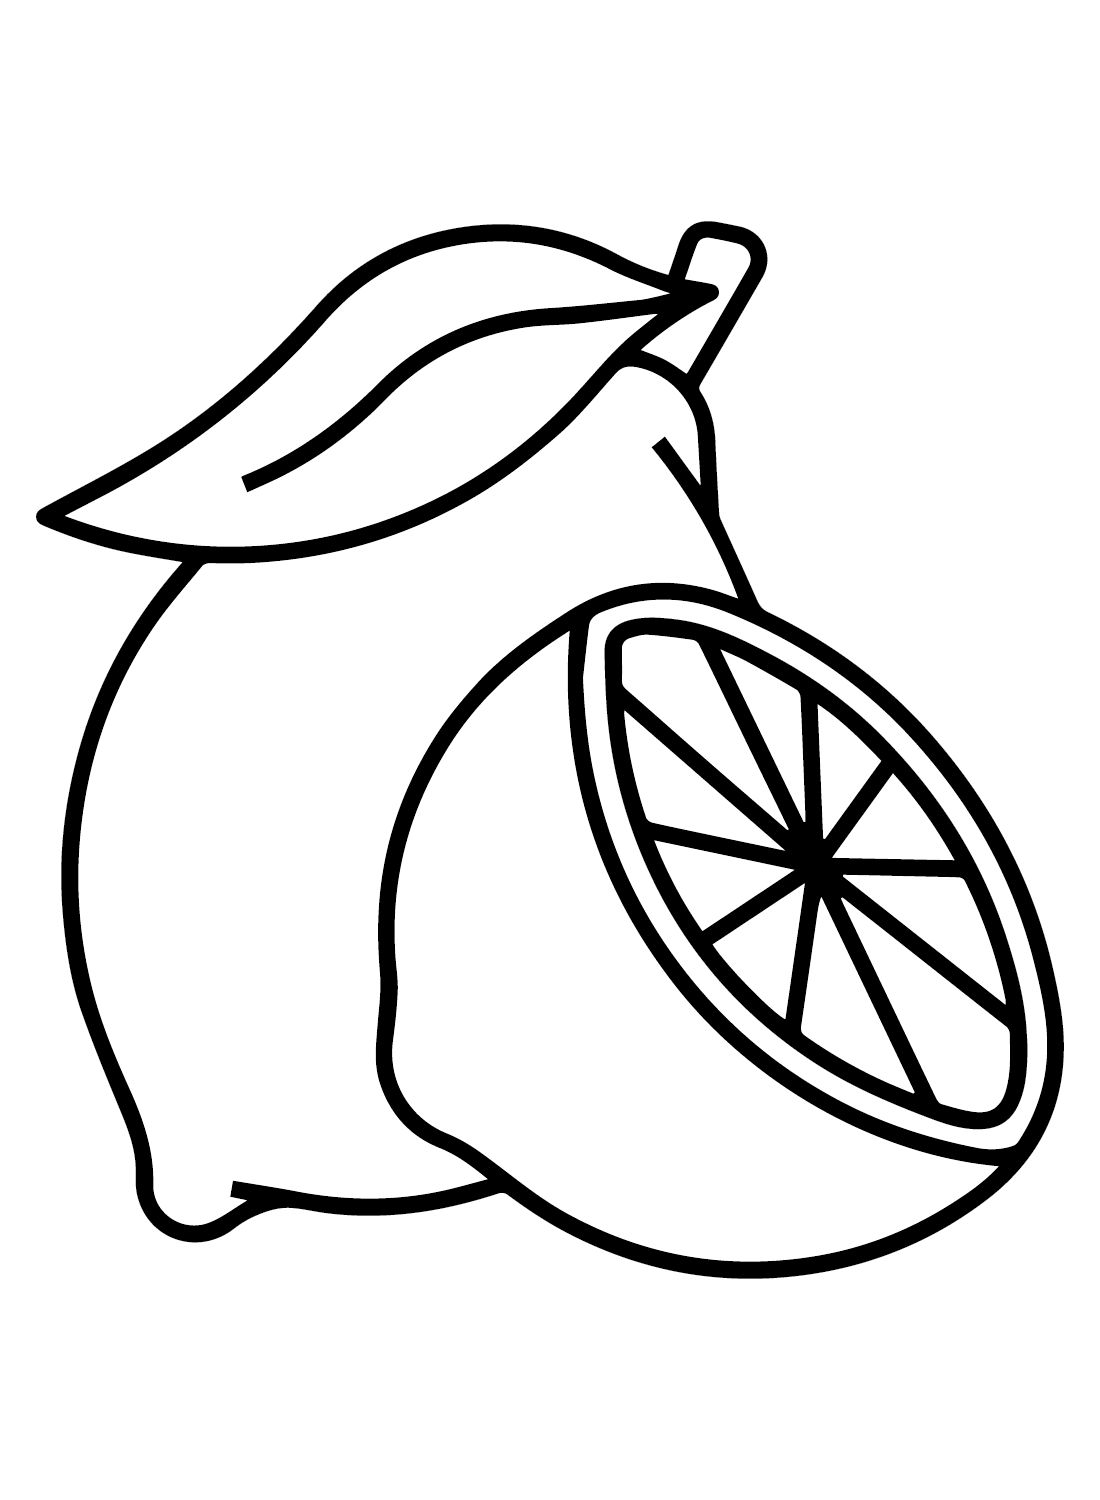 Lemons Pictures Coloring Page